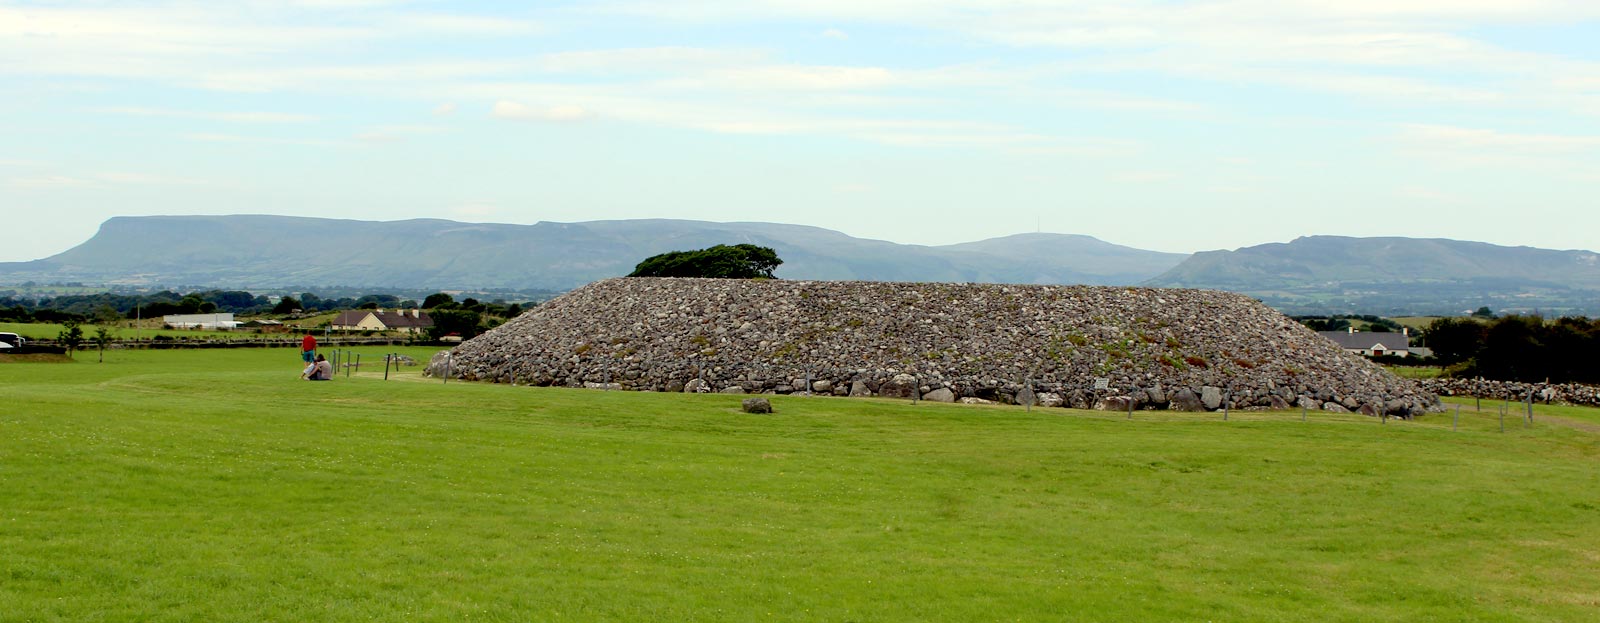 The landscape to the north viewed from the main monument at Carrowmore.